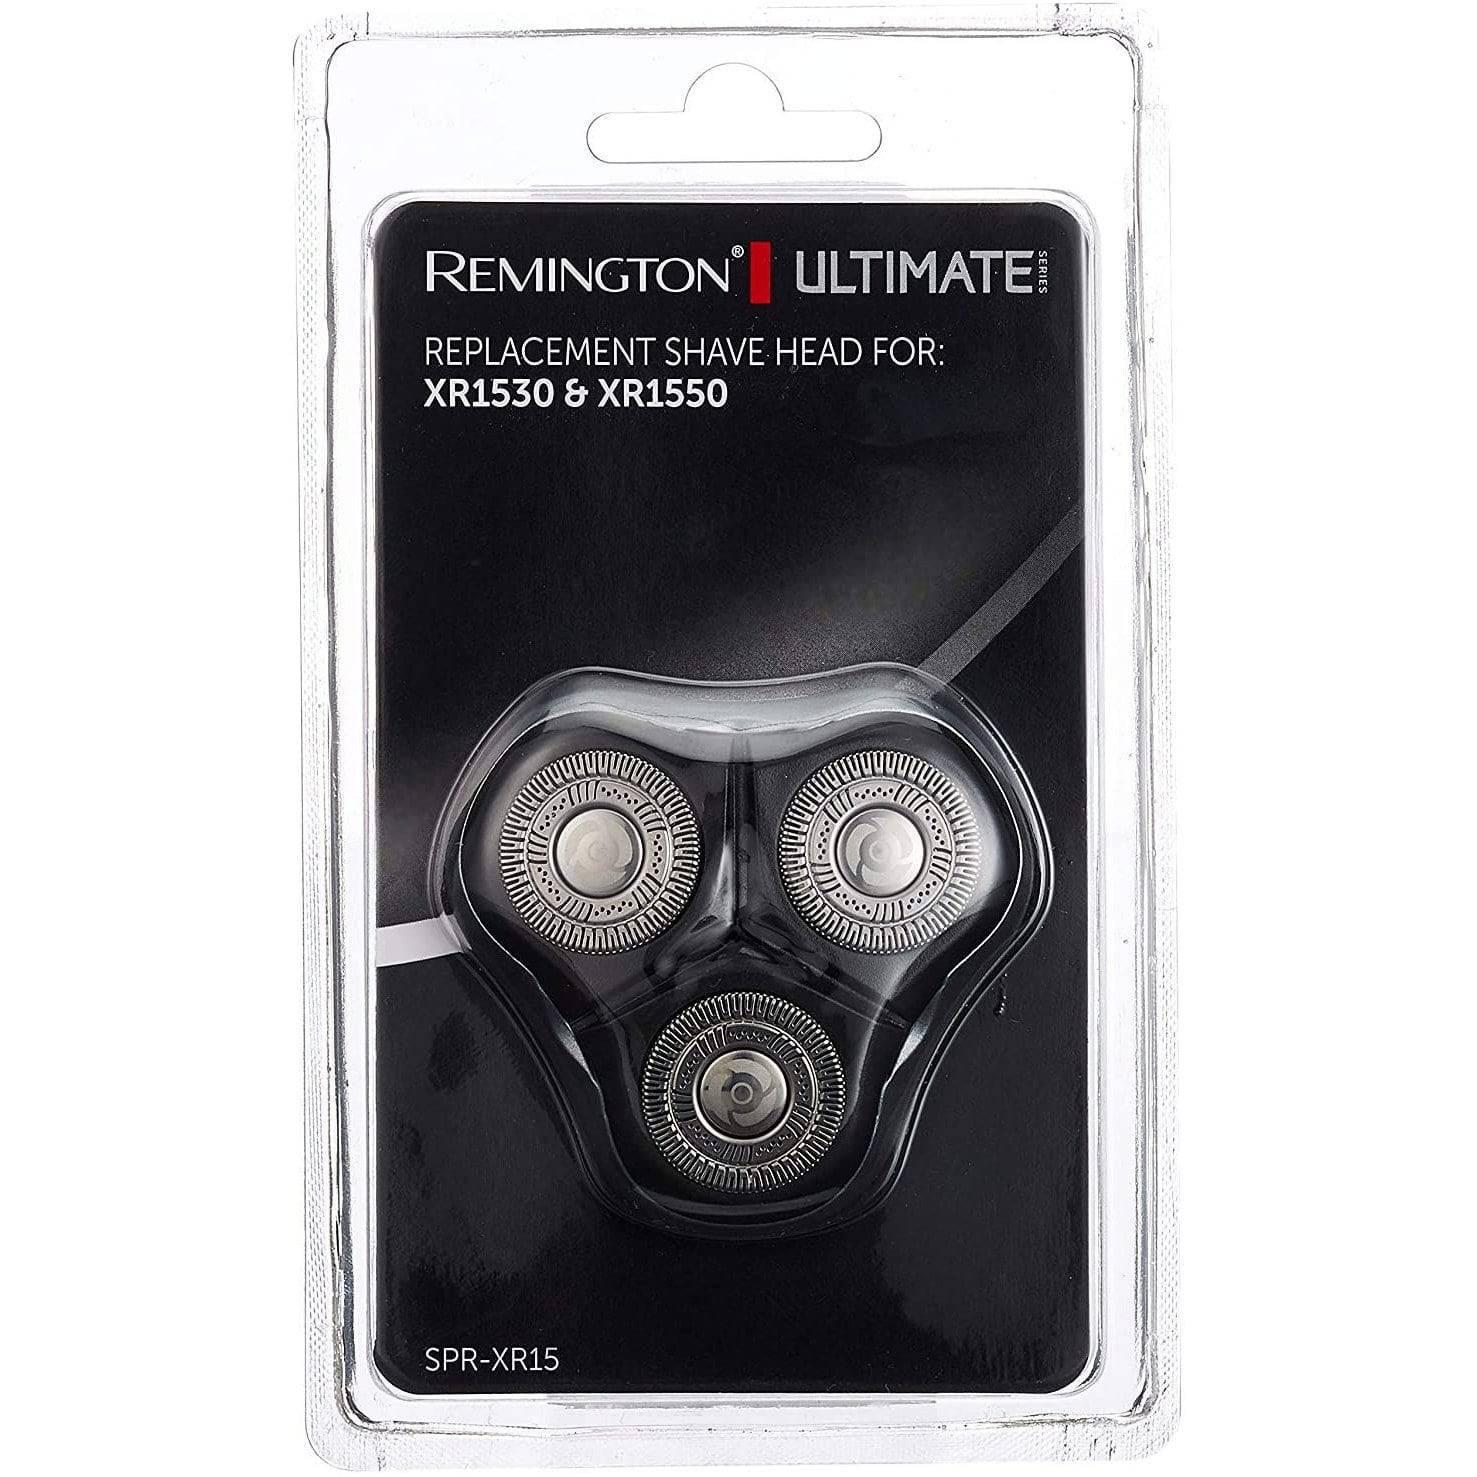 Remington SPR-XR15 Shaving Head Replacement for XR1530/XR1550 Shavers - Black - Healthxpress.ie